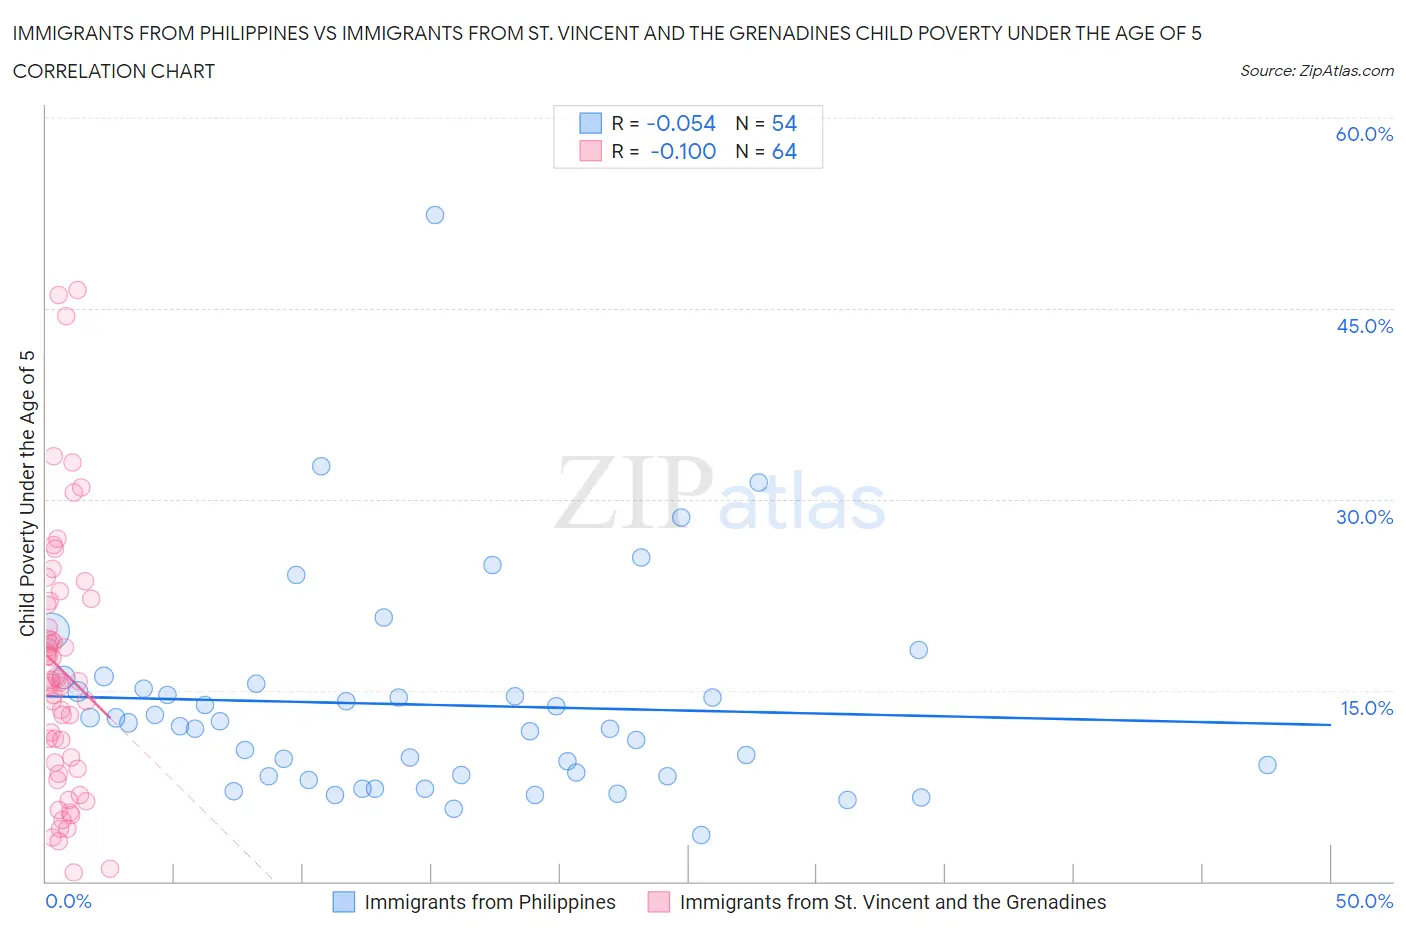 Immigrants from Philippines vs Immigrants from St. Vincent and the Grenadines Child Poverty Under the Age of 5